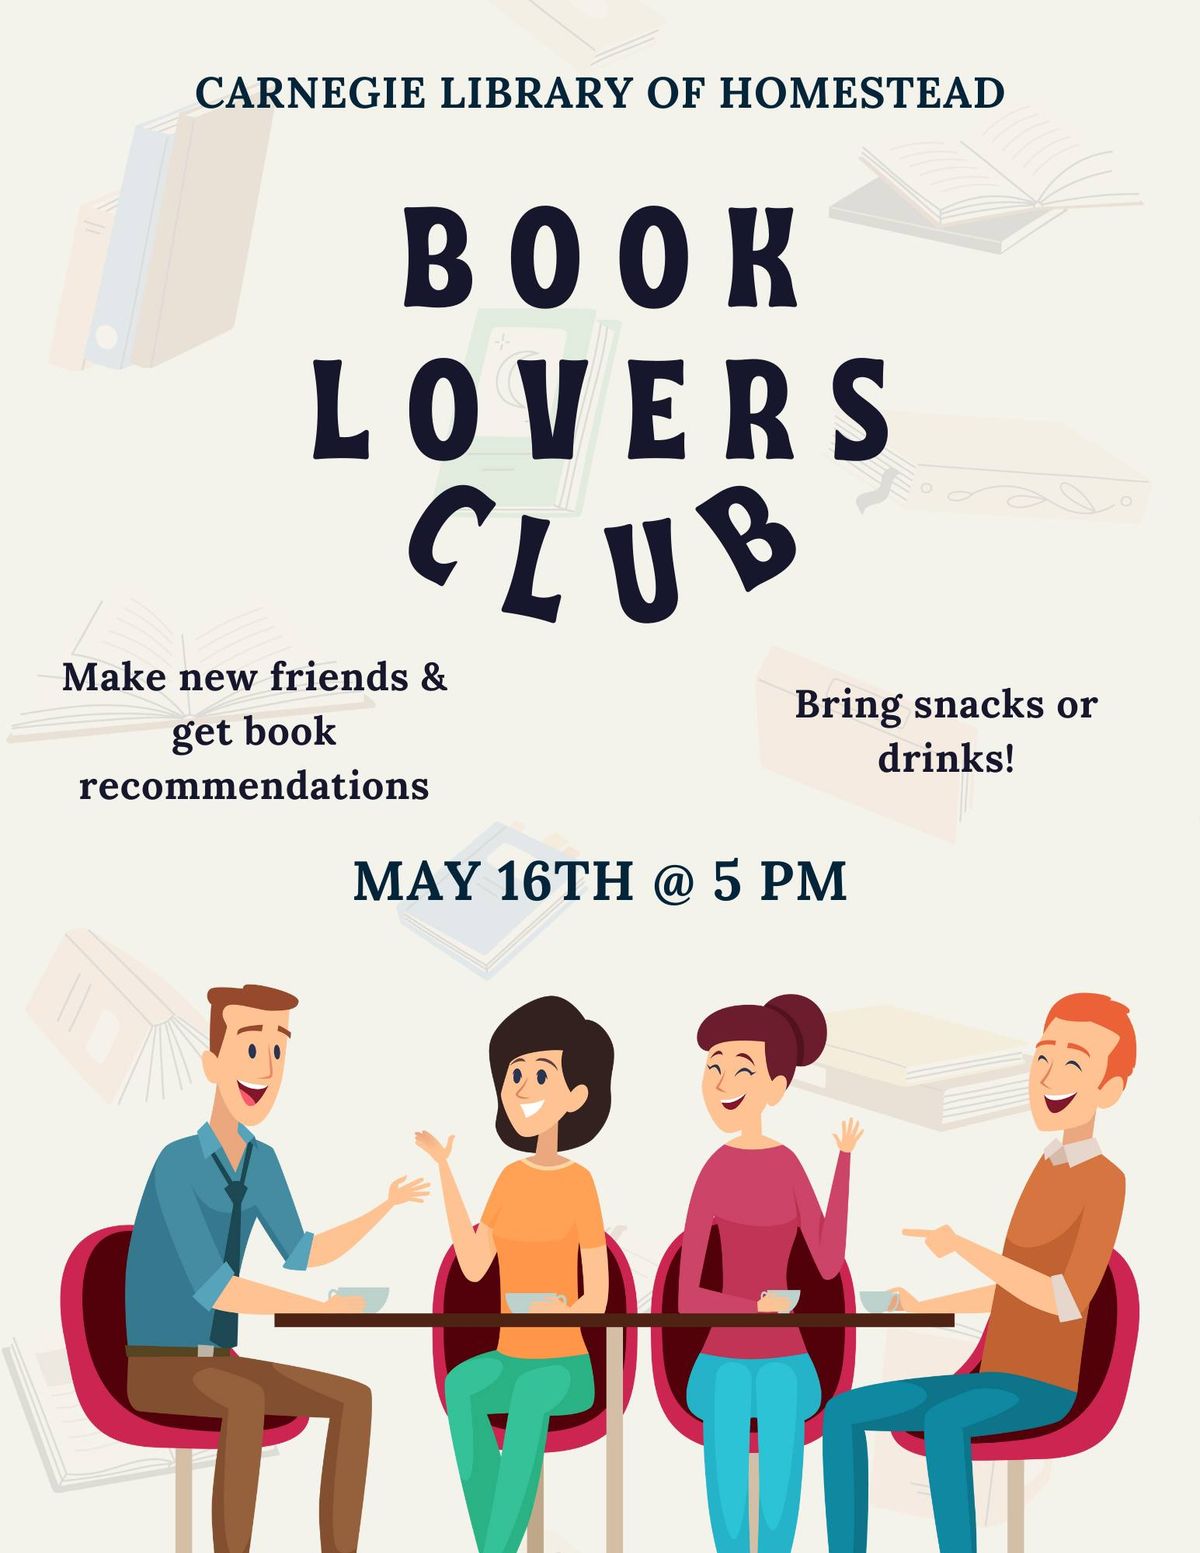 Book Lovers Club